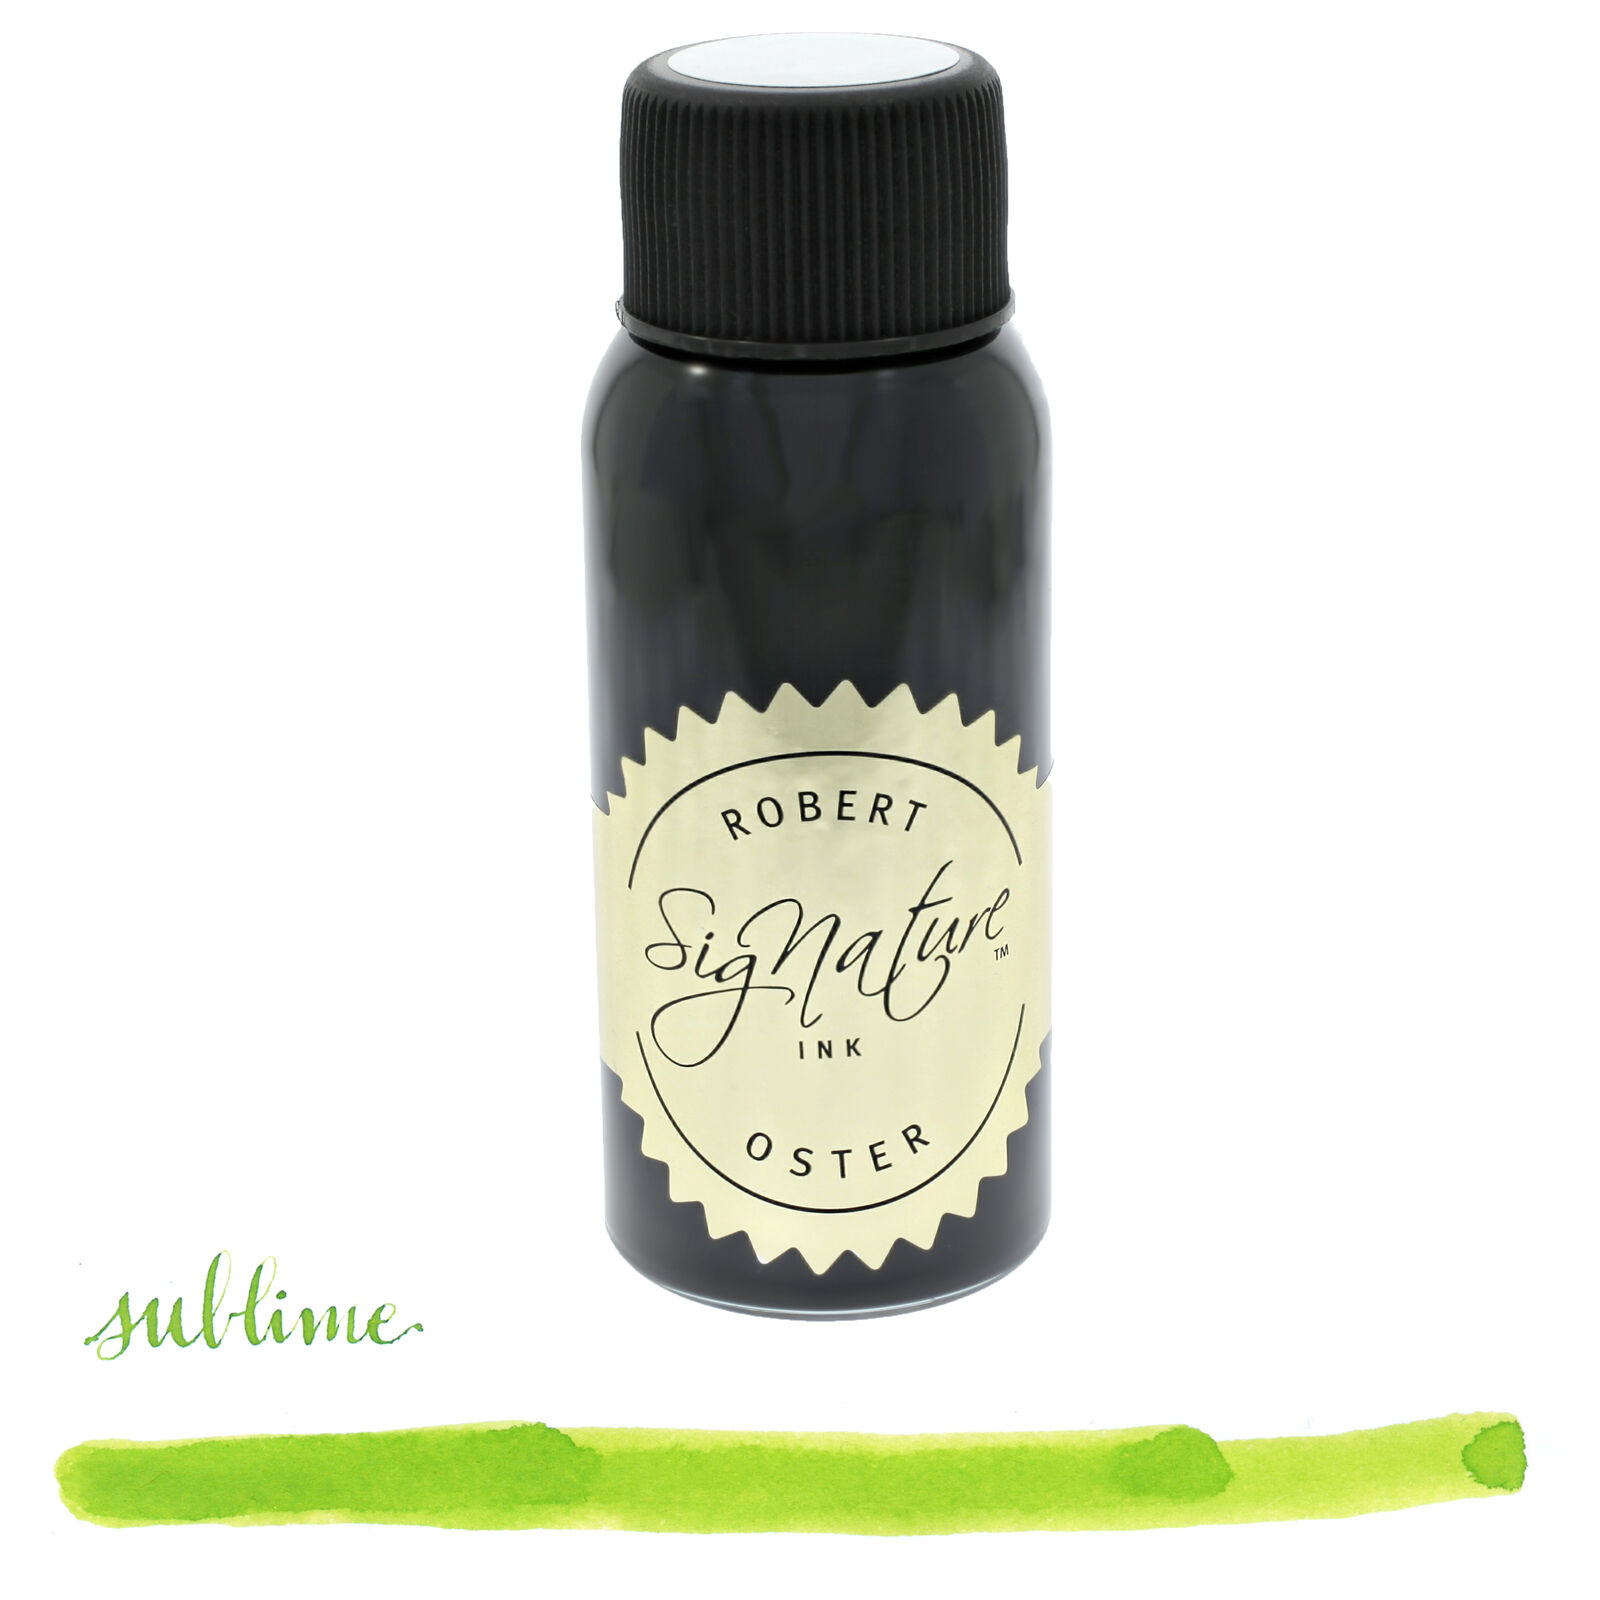 Robert Oster Signature Sublime (Green Yellow) 50ml Bottled Ink for Fountain Pens